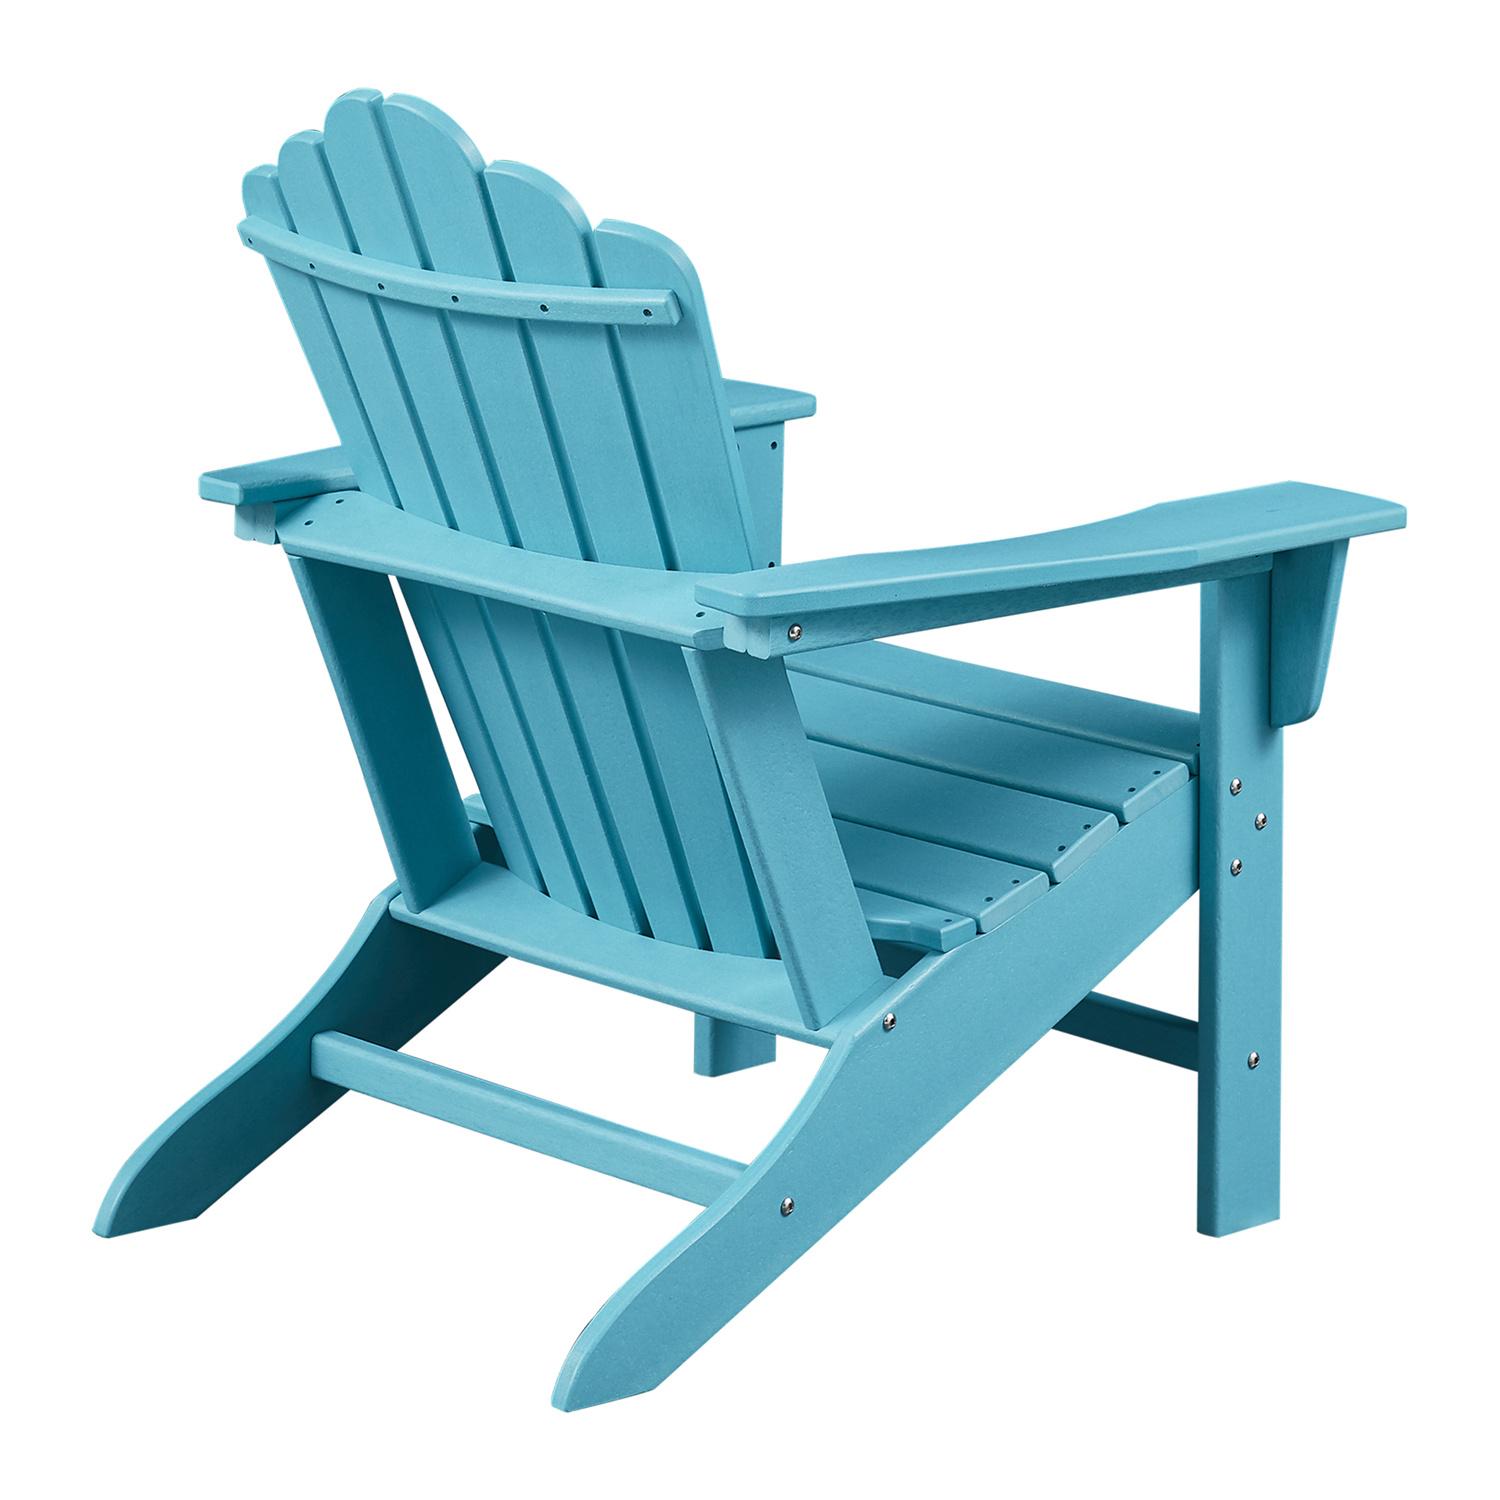 Adirondack Chair Patio Chairs Lawn Chair Outdoor Chairs Painted Chair Weather Resistant for Patio Deck Garden, Backyard Deck, Fire Pit & Lawn Furniture Porch and Lawn Seating- Blue - image 4 of 7